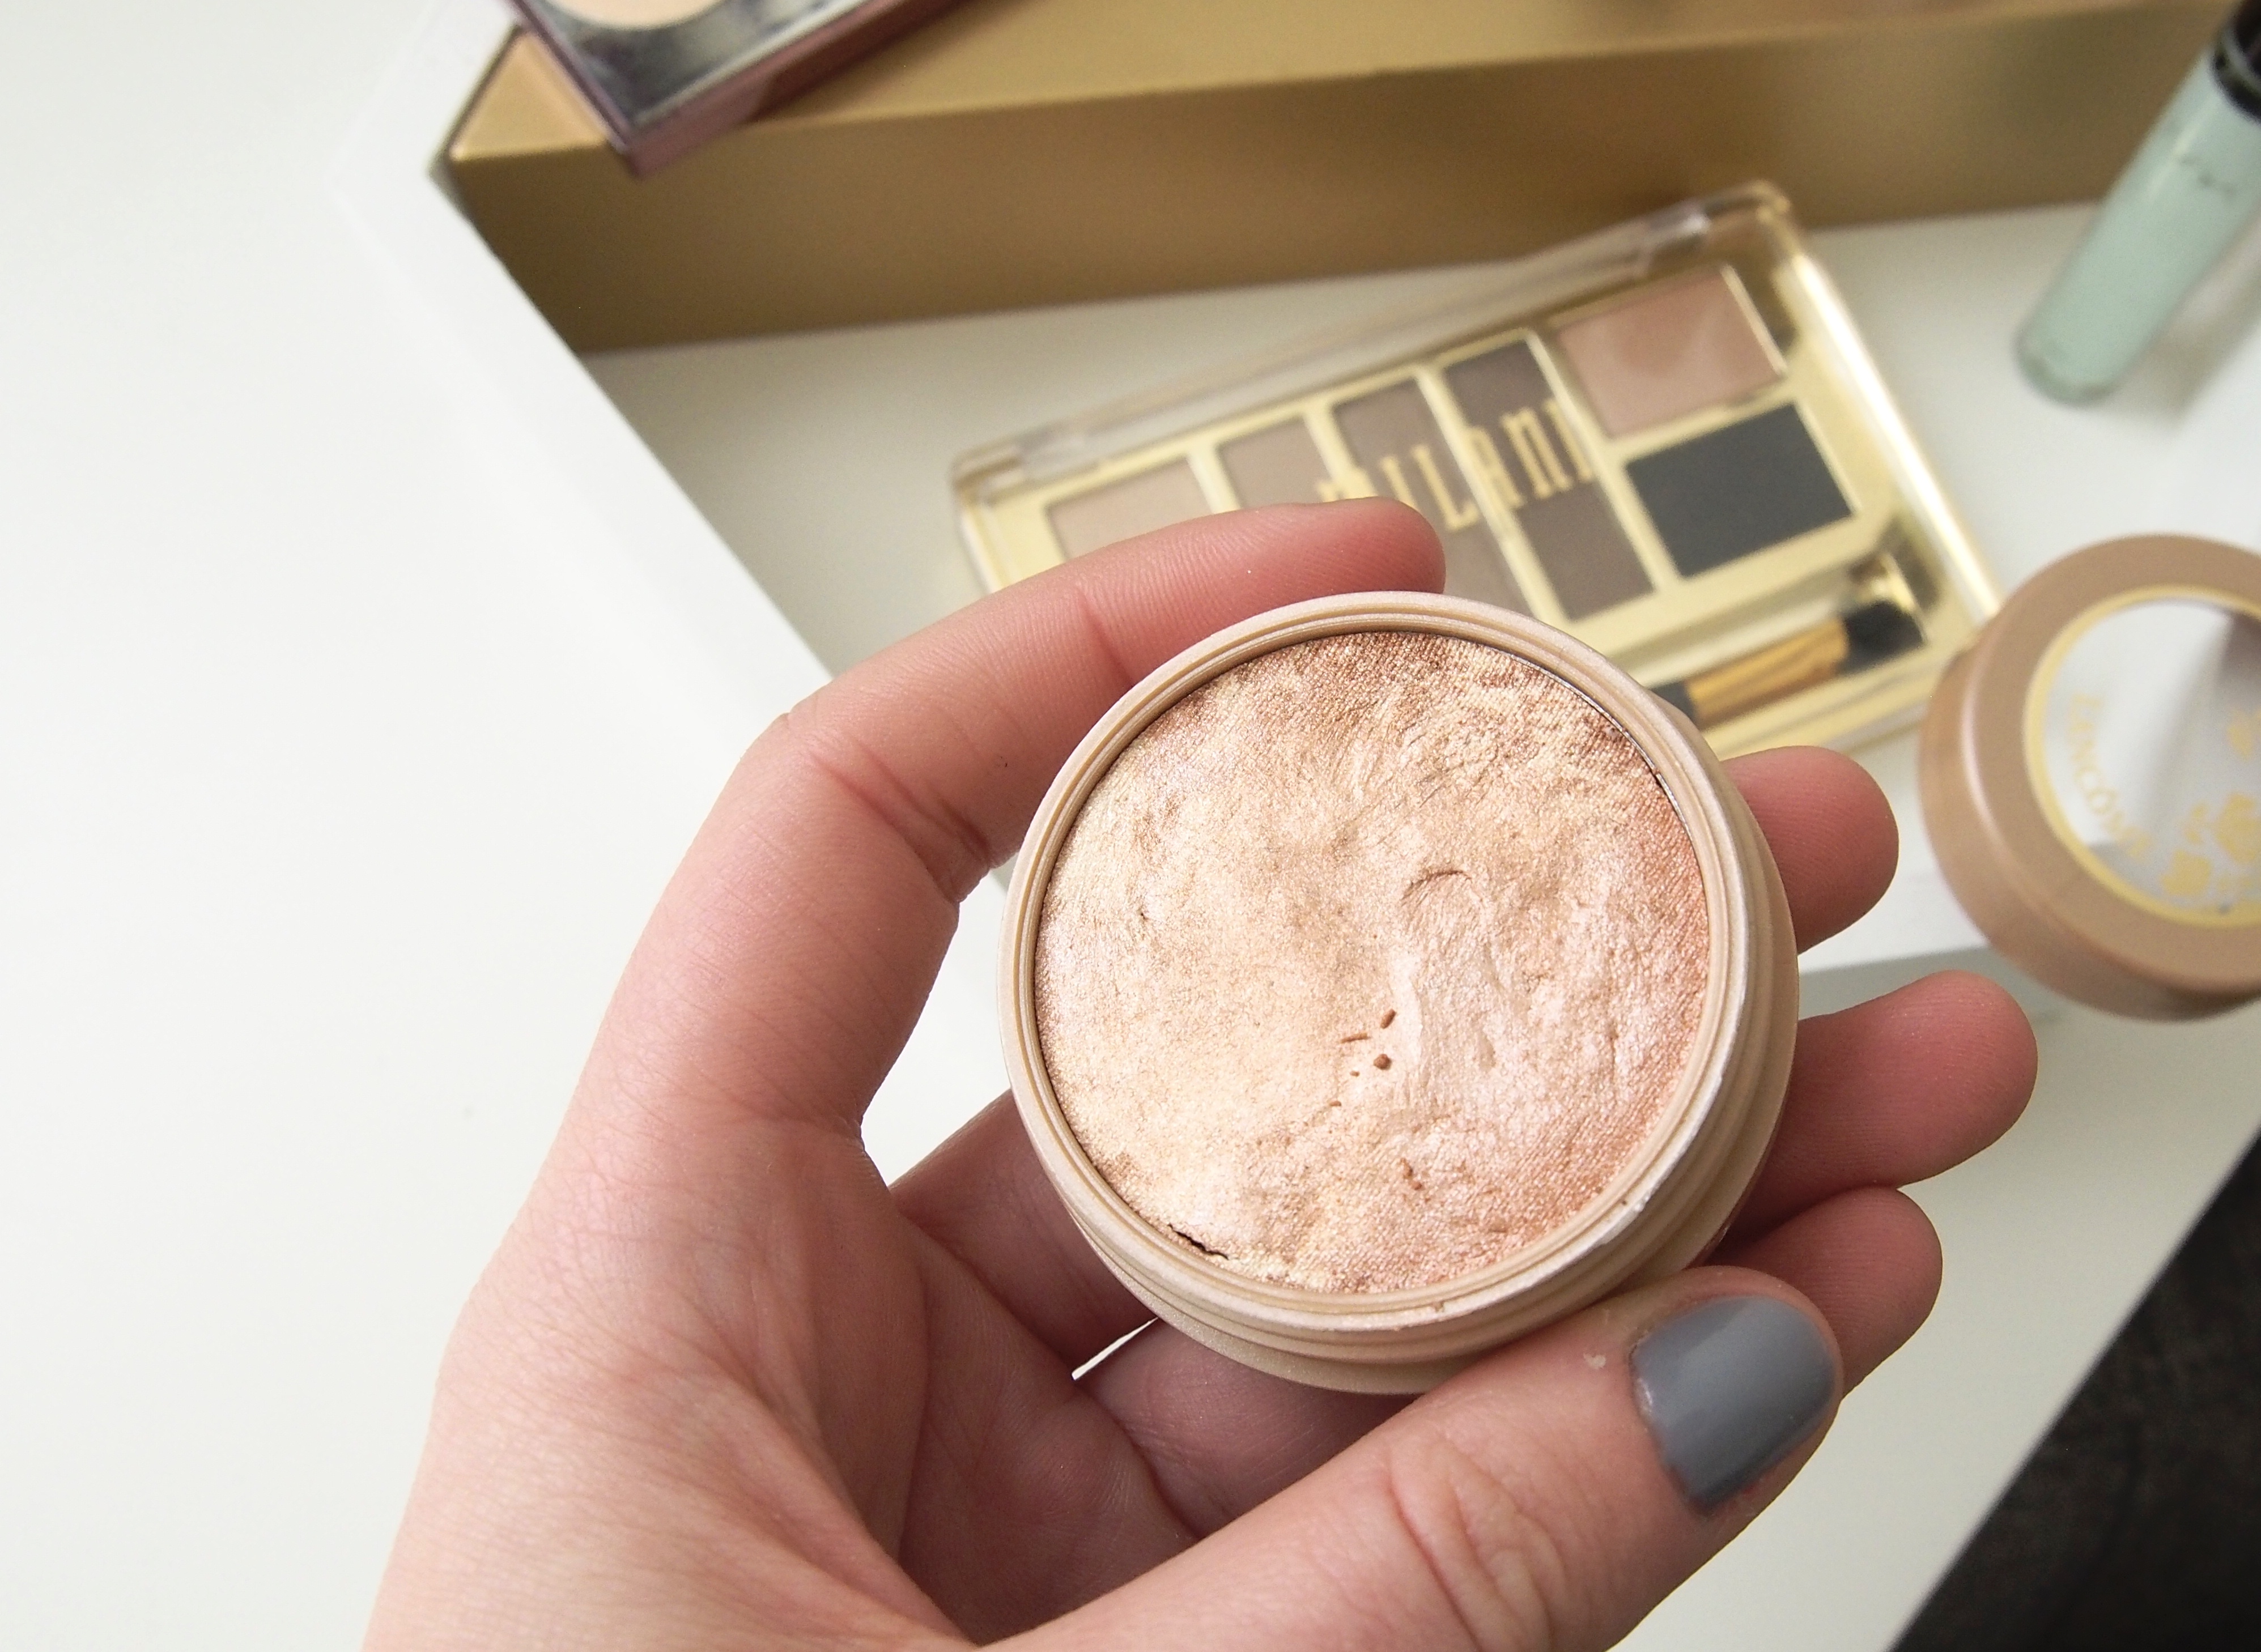 Products To Use More Often - Lancome Glow Subtil Silky Creme Highlighter